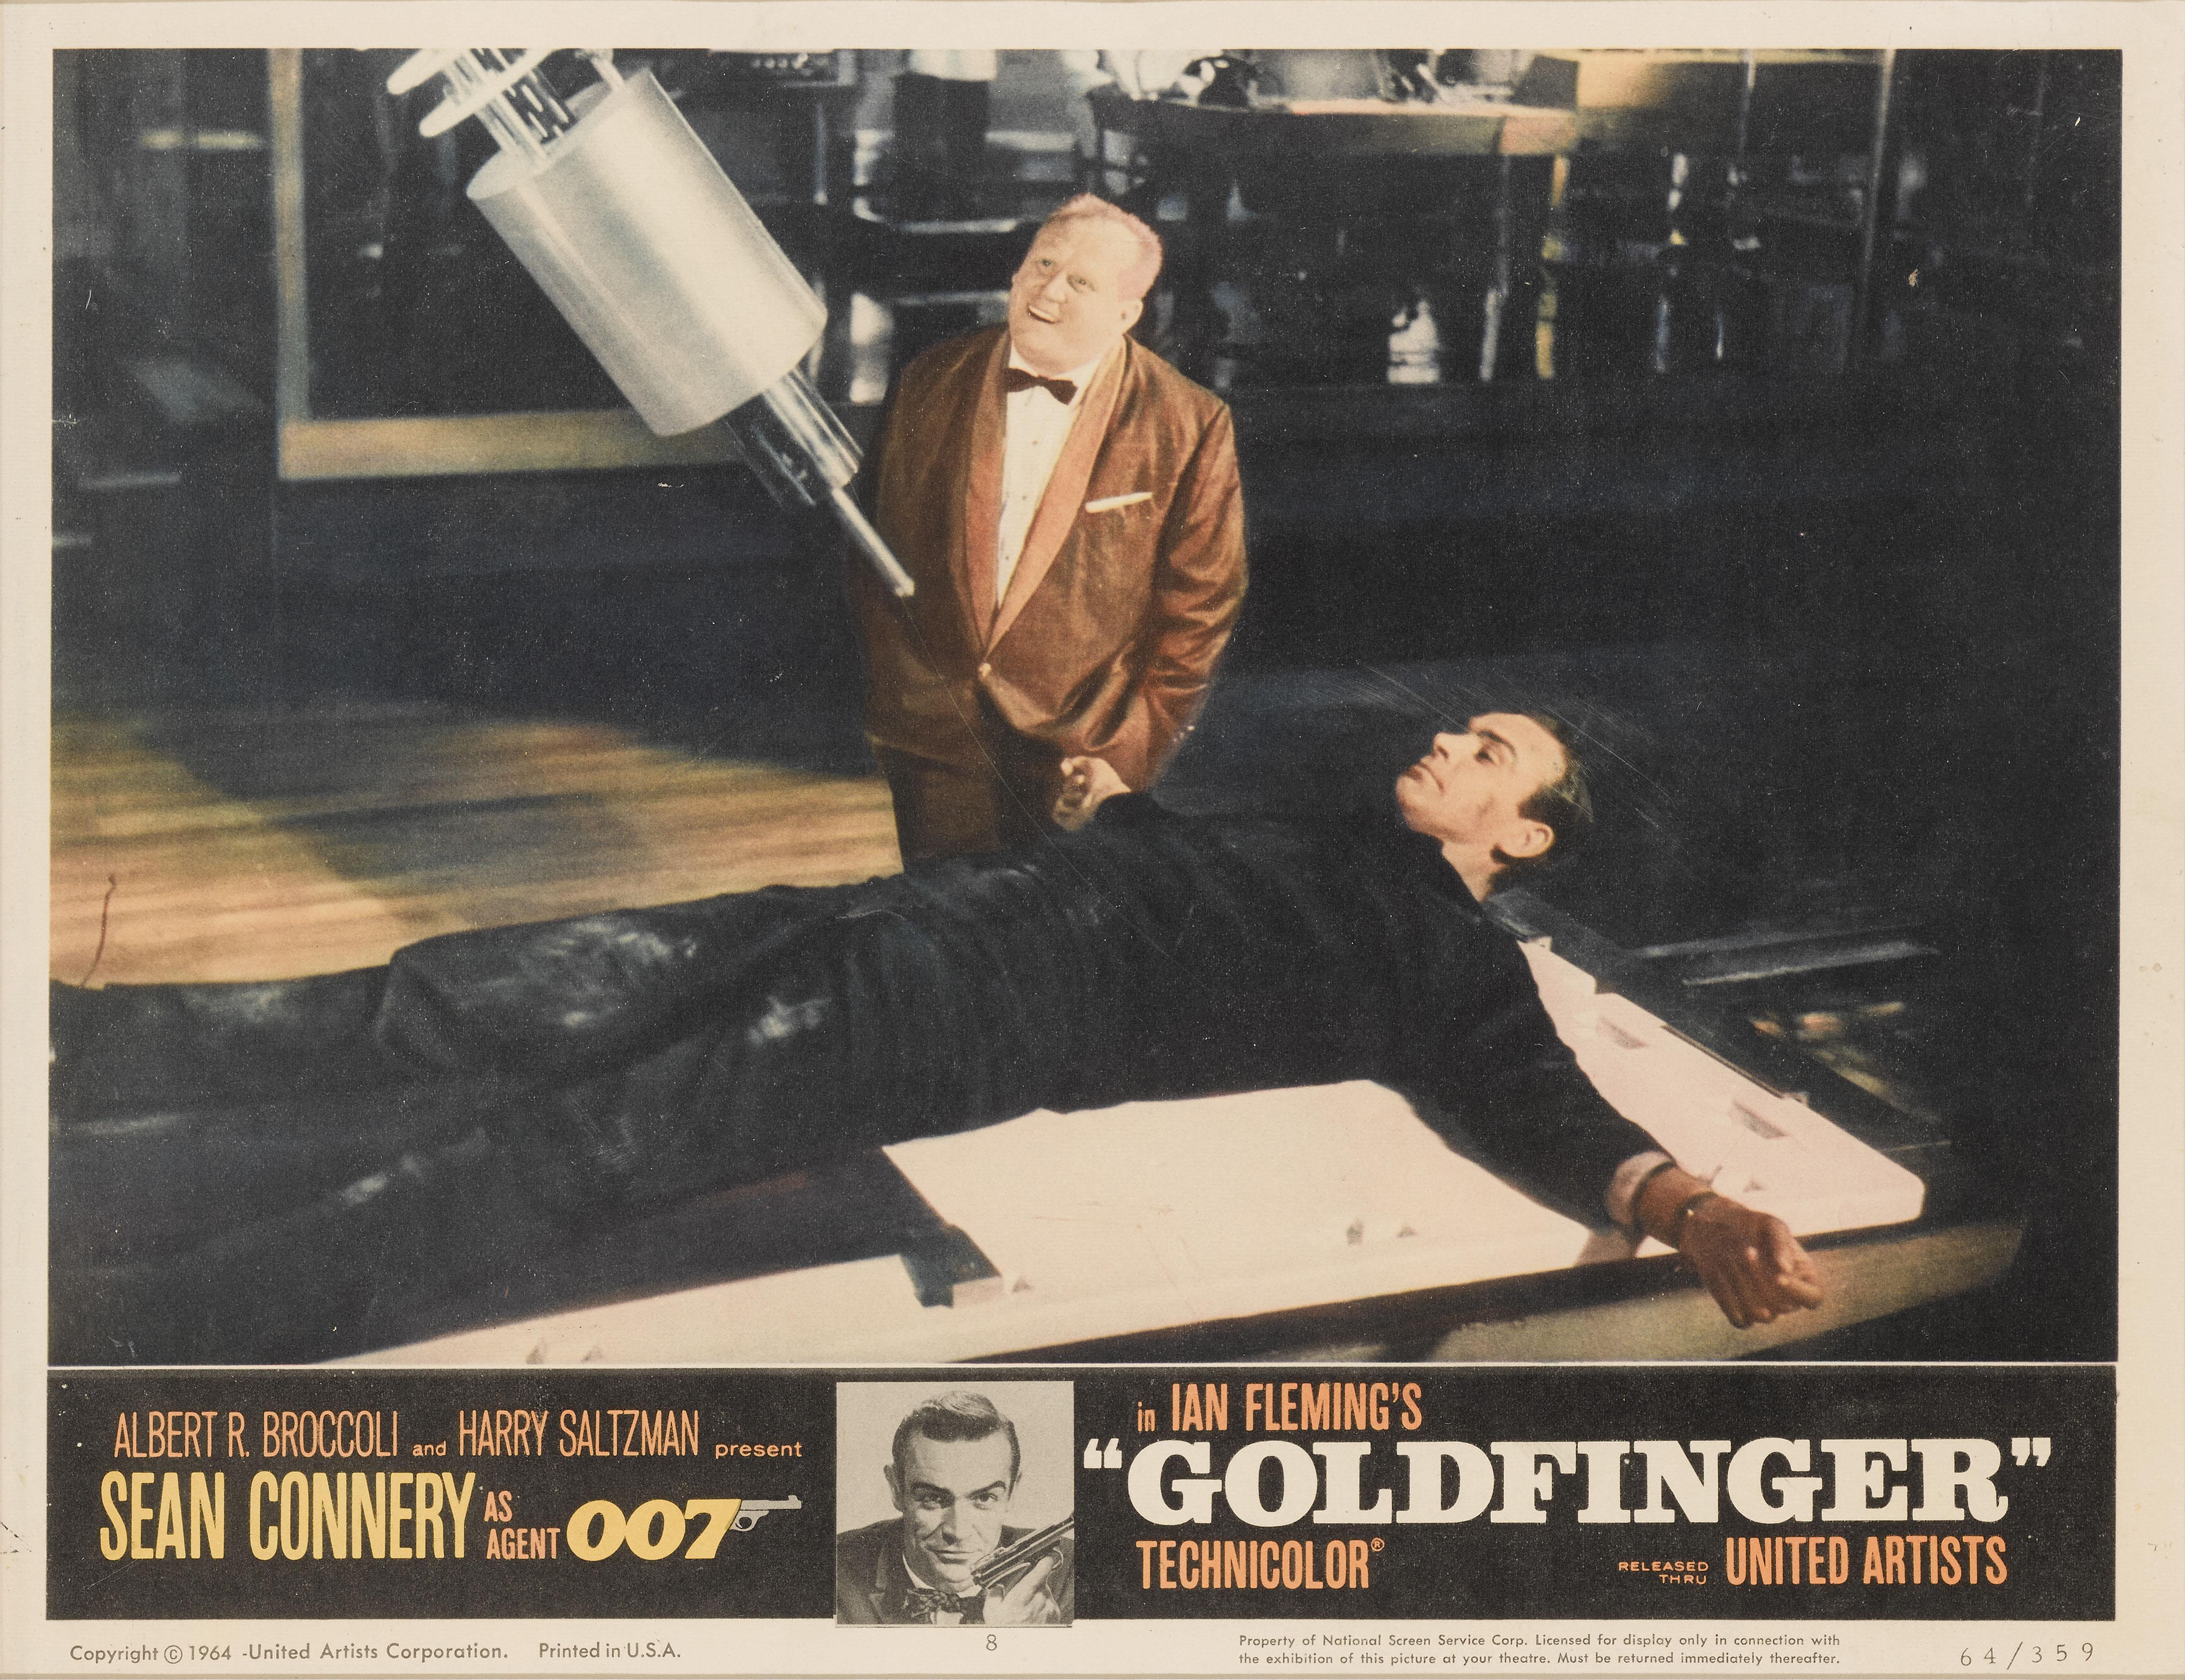 Original US lobby card number 8 used for Goldfinger 1964. This was the third time that Sean Connery would play James Bond 007, and the first of four Bond films that Guy Hamilton would direct. It is a hugely popular film in the Bond series, with the